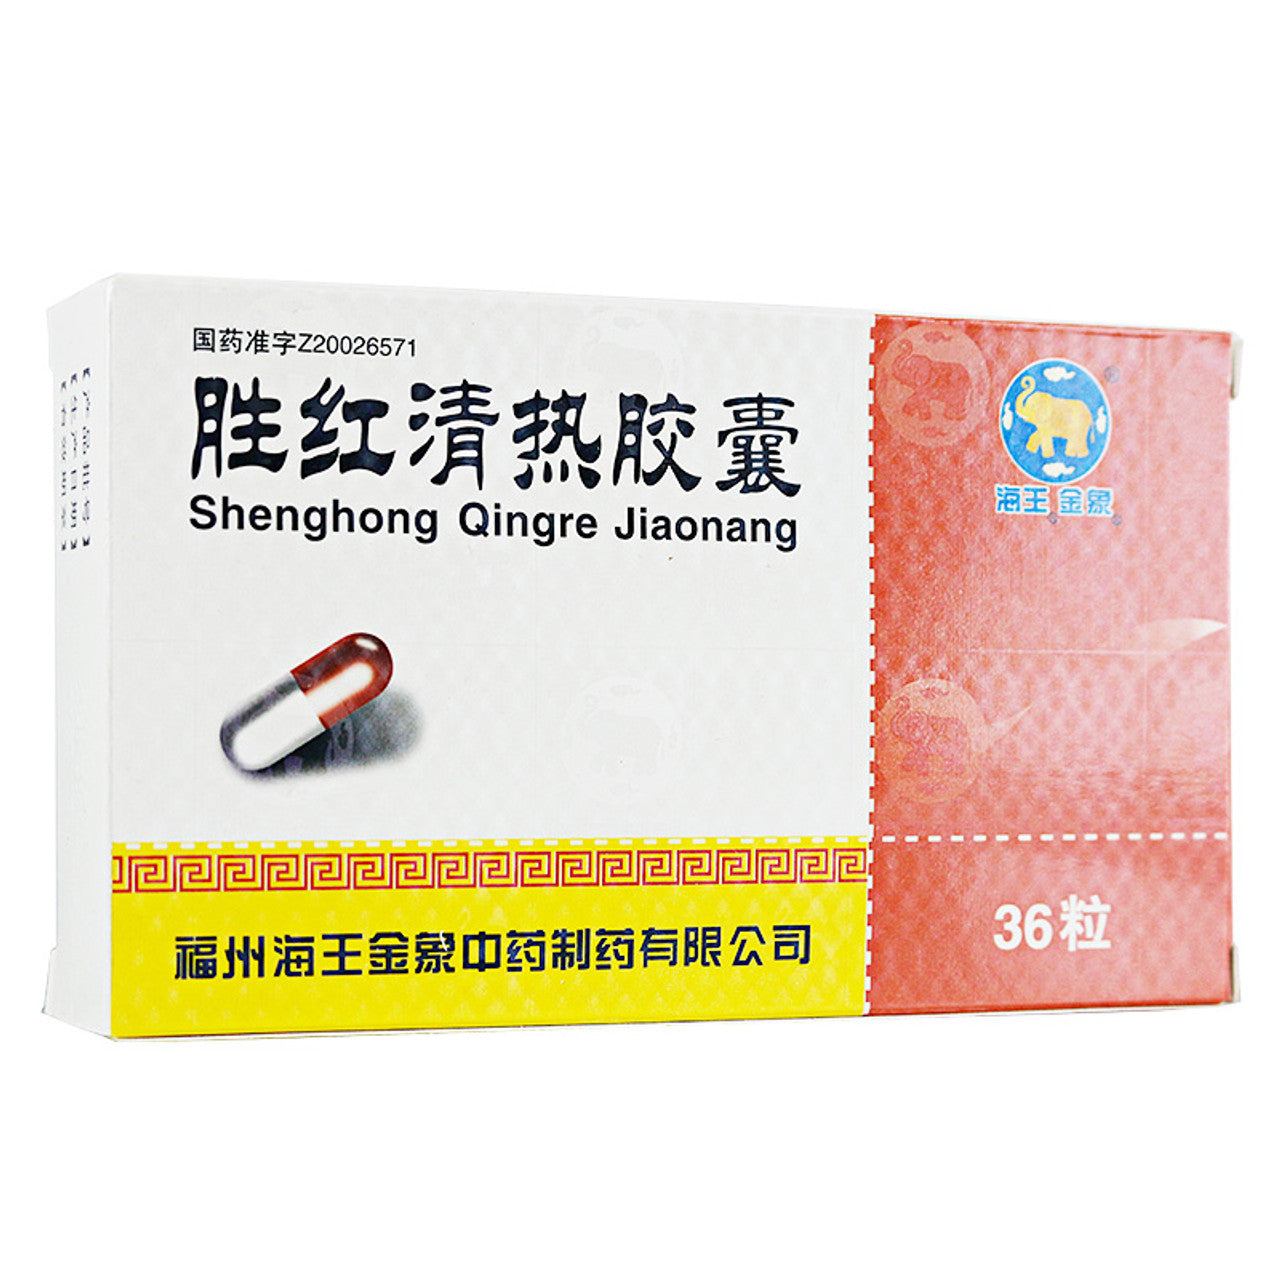 China Herb. Shenghong Qingre Jiaonang / Shenghong Qingre Capsules / Sheng Hong Qing Re Jiao Nang for damp-heat injection, qi stagnation and blood stasis, and patients with abdominal pain in chronic pelvic inflammatory disease.